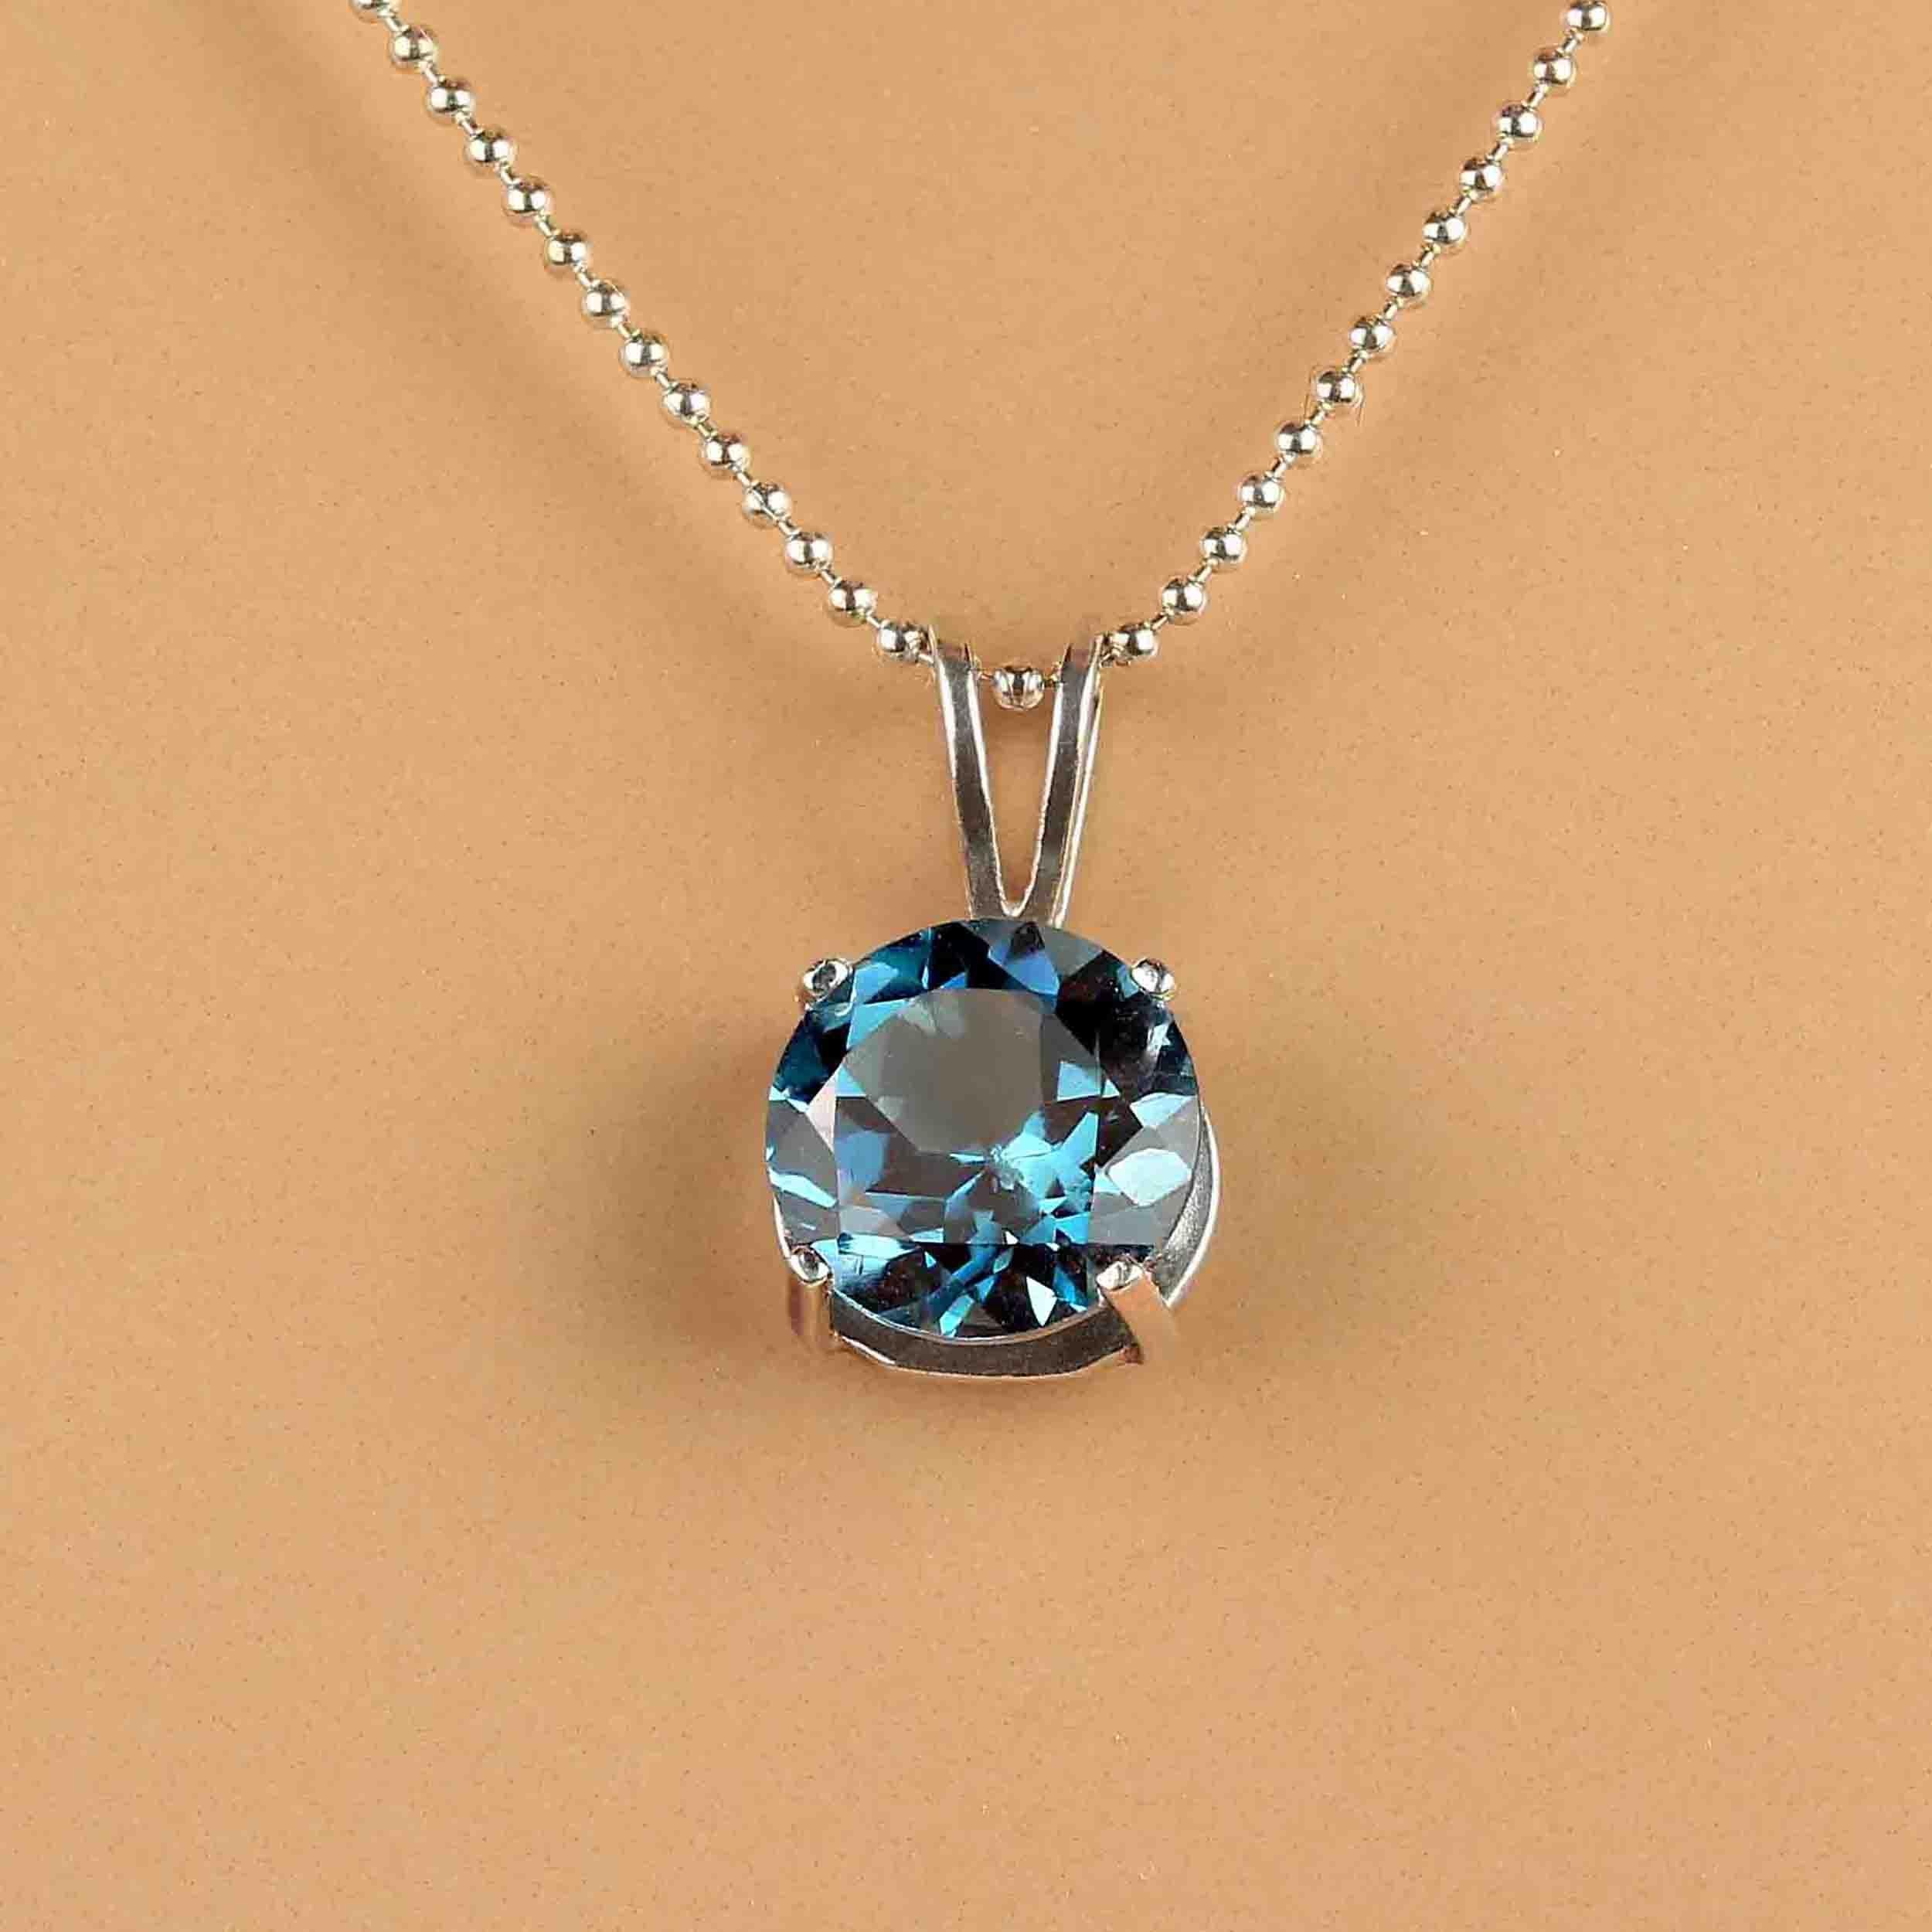 Intense 10MM London Blue Topaz in Sterling Silver Pendant. This elegant pendant is 4.2CT is perfect for everyday wear and on into the evening. This is an unusual light London Blue tone. 